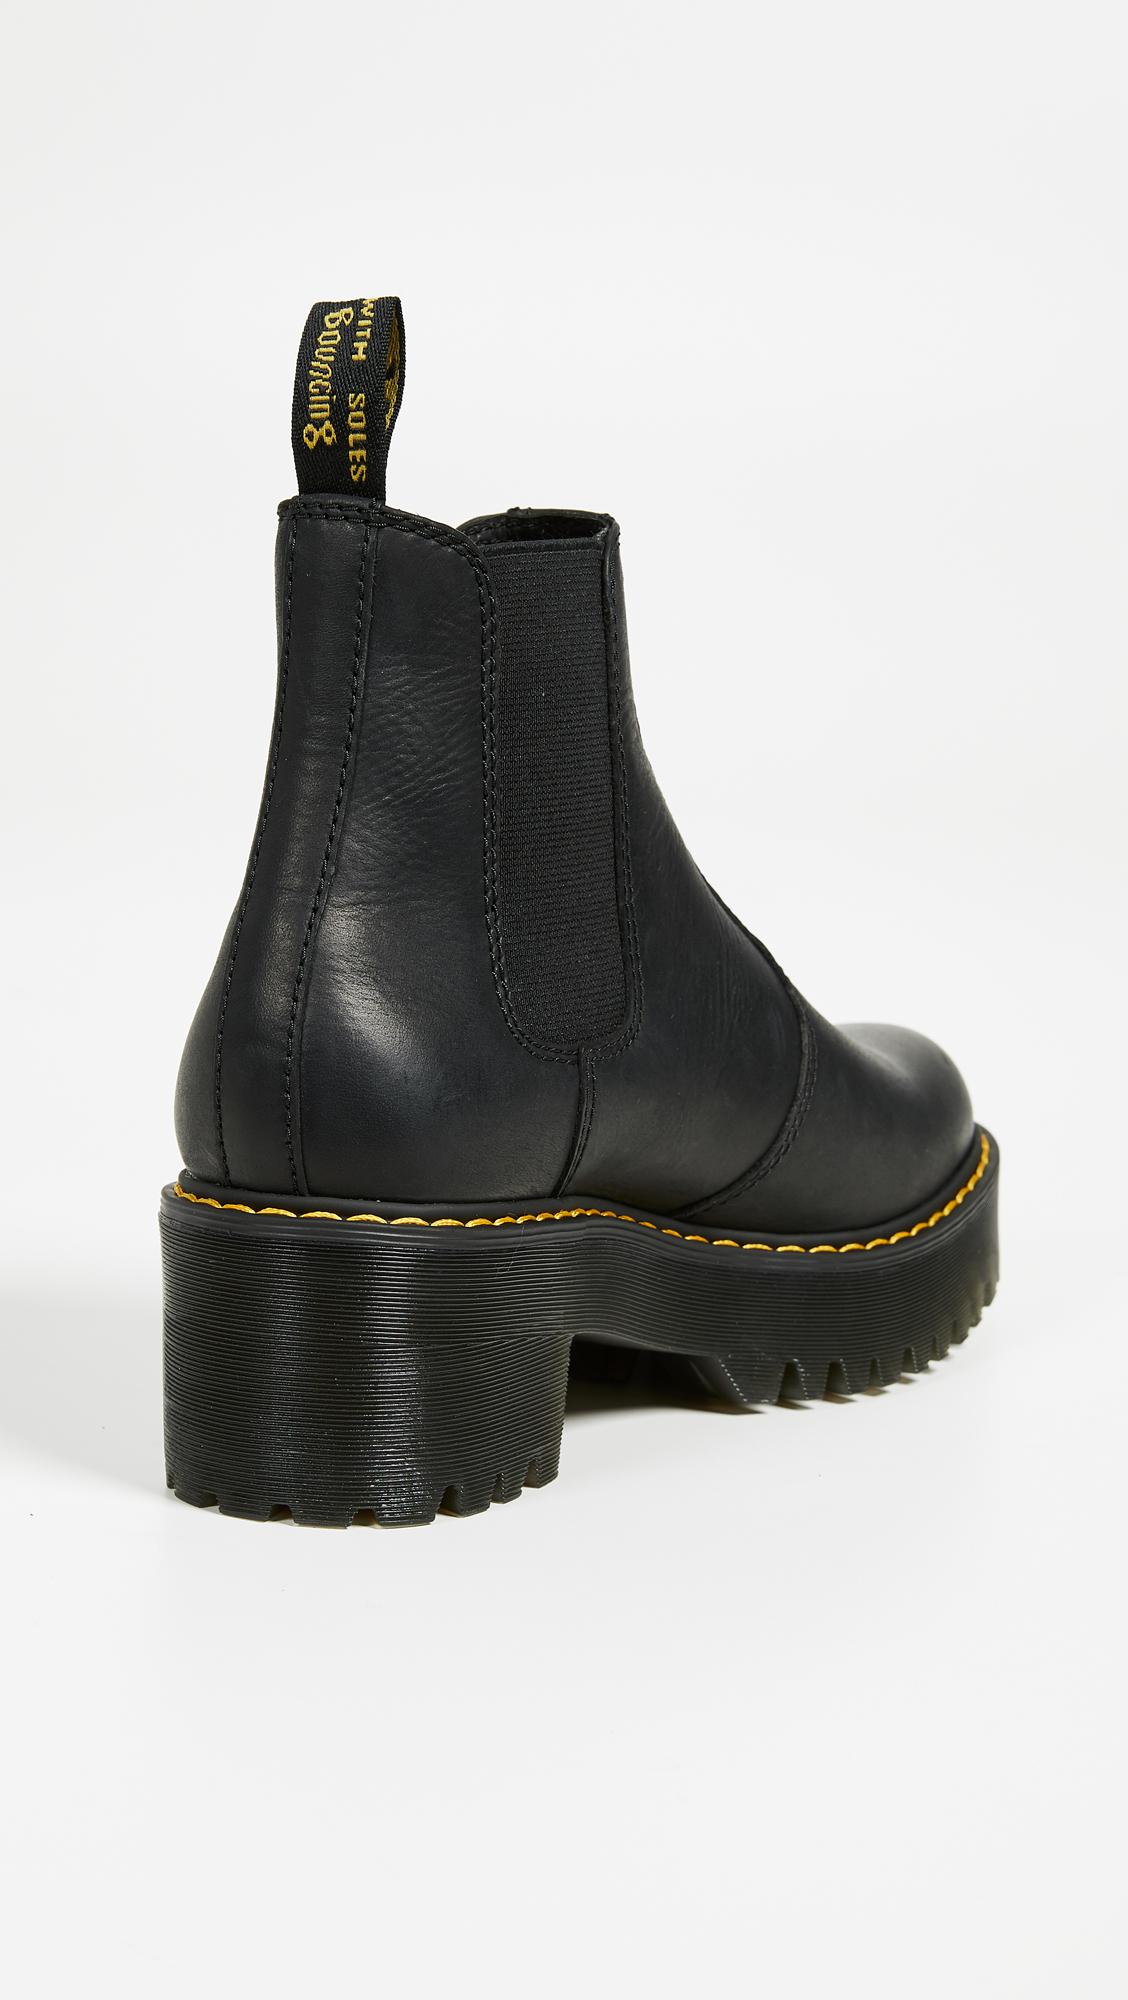 Dr. Martens Leather Rometty Chelsea Boots in Black - Lyst